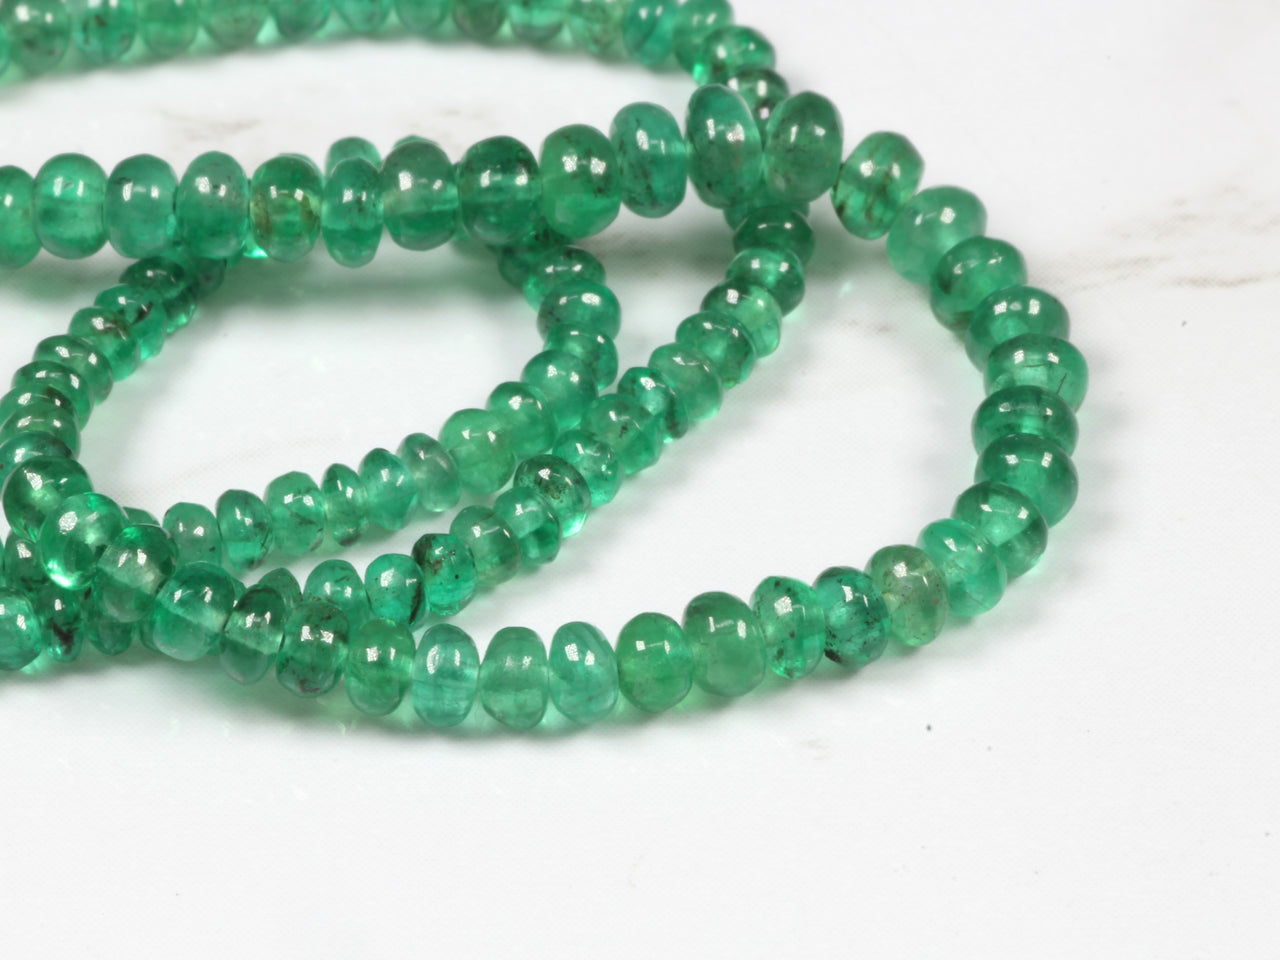 AA Green Emerald 2.5mm - 3.5mm Smooth Rondelles Bead Strand